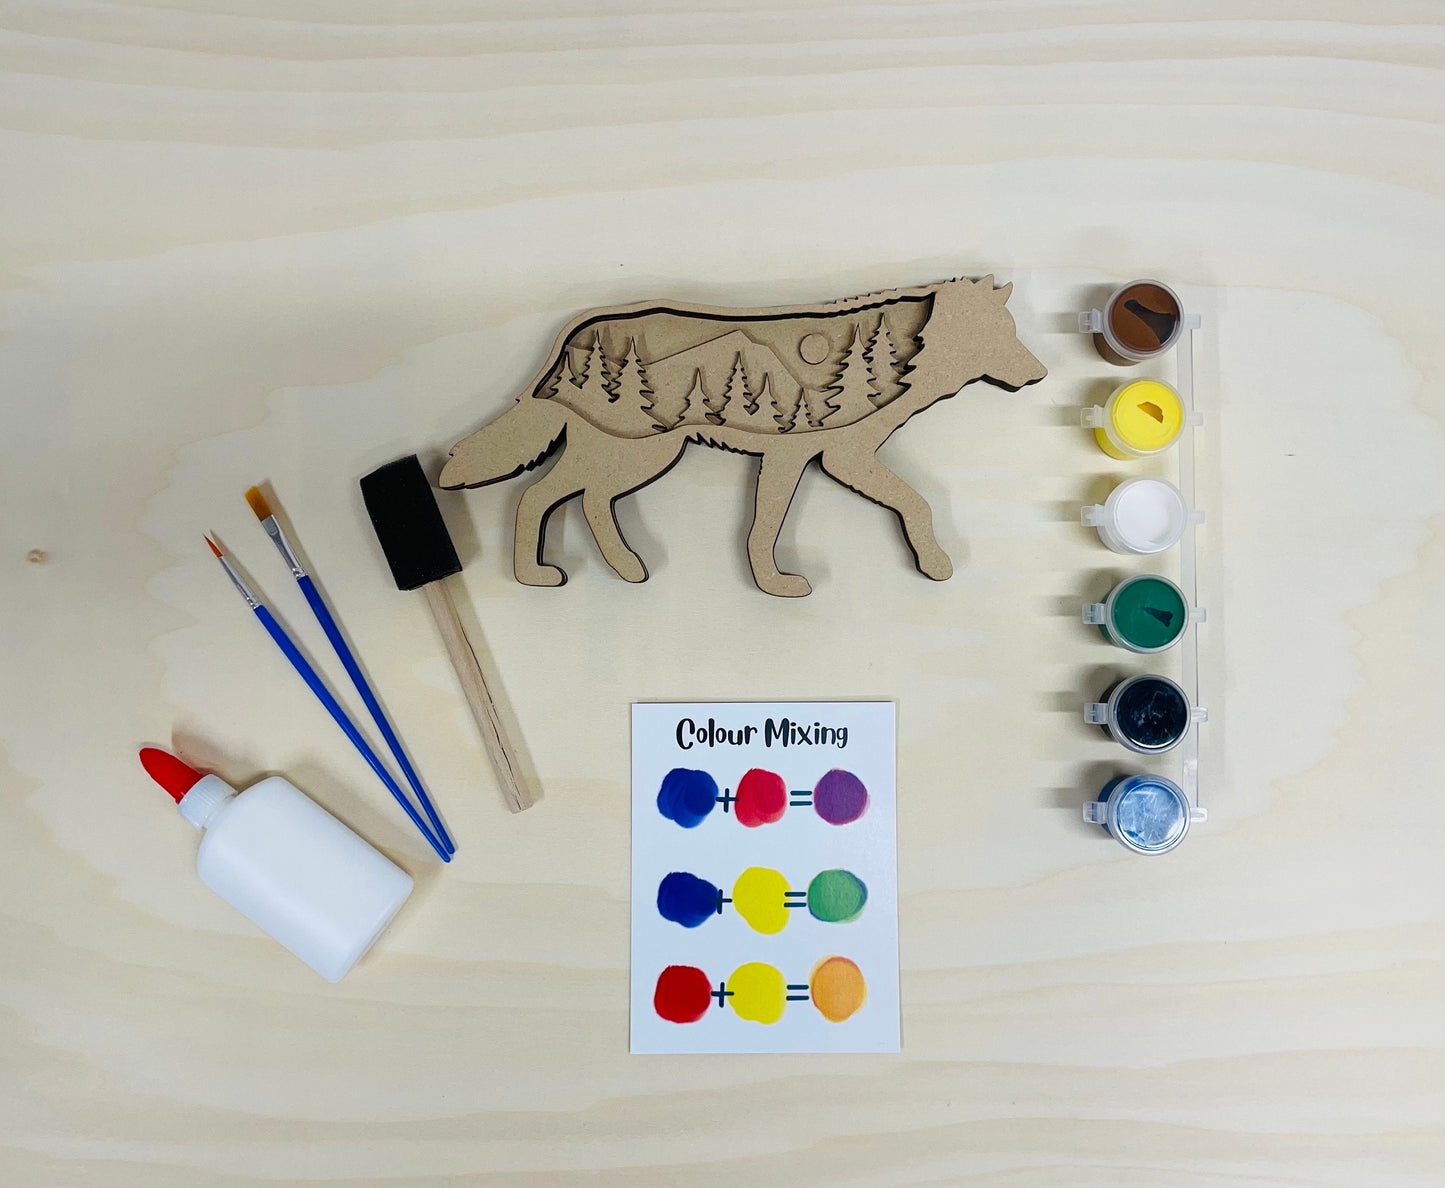 DIY Layered Wolf Scene, Wood Kit, Ready to Paint, Make Your Own Activity, Nature Craft, Paint Party, Paint Set, Shadow Box Kit, Woodland